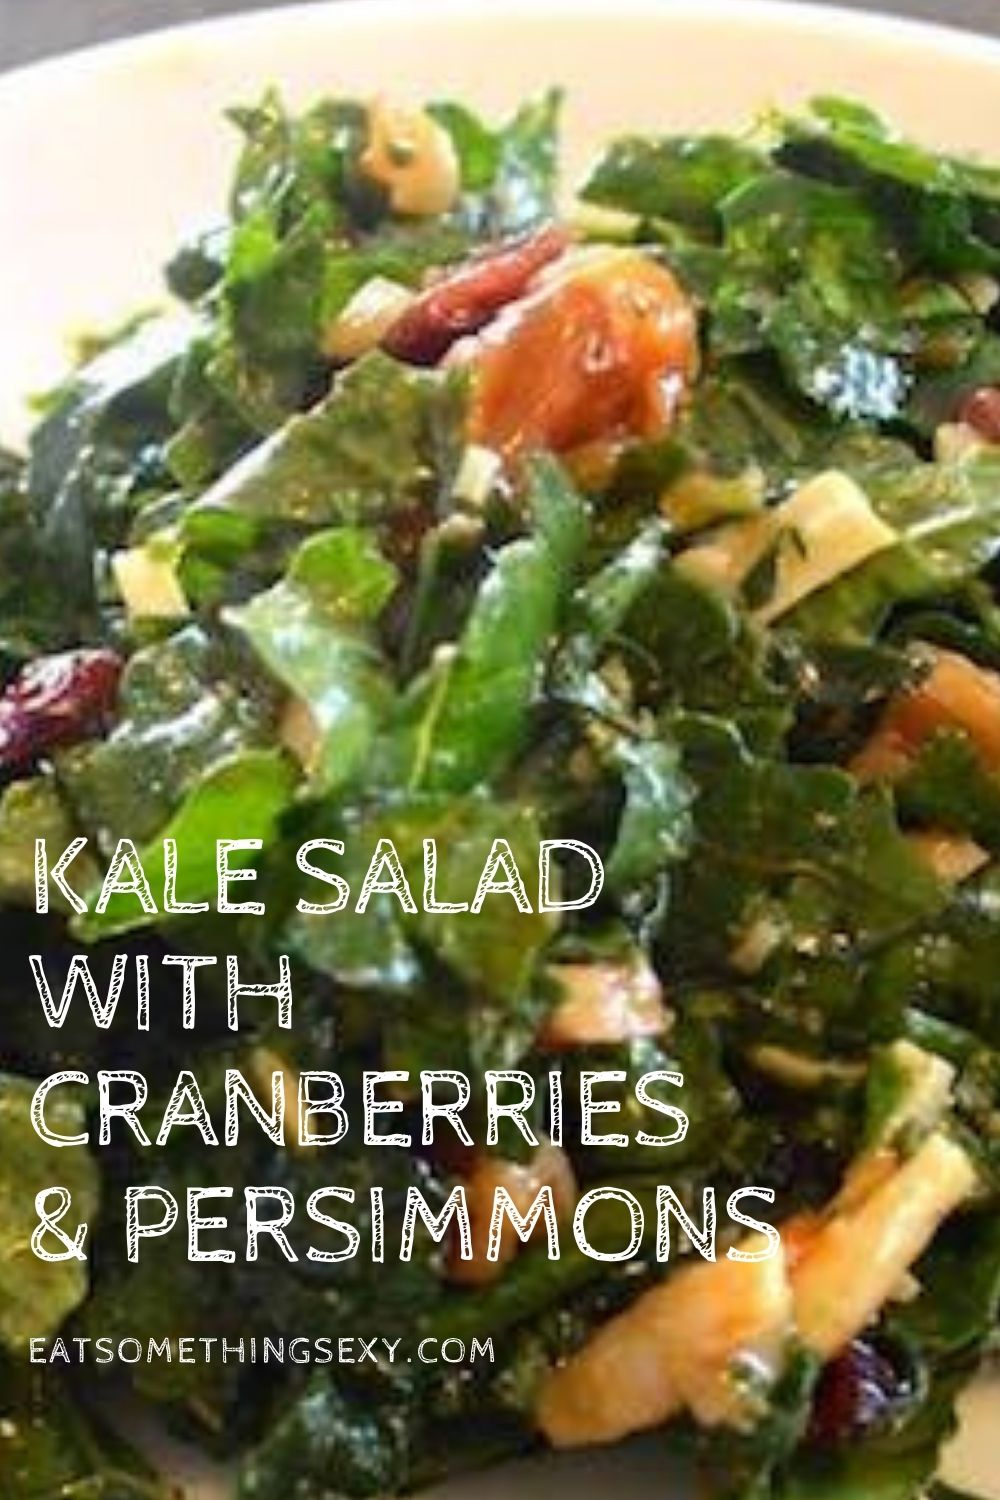 Kale salad with cranberries and persimmons graphic